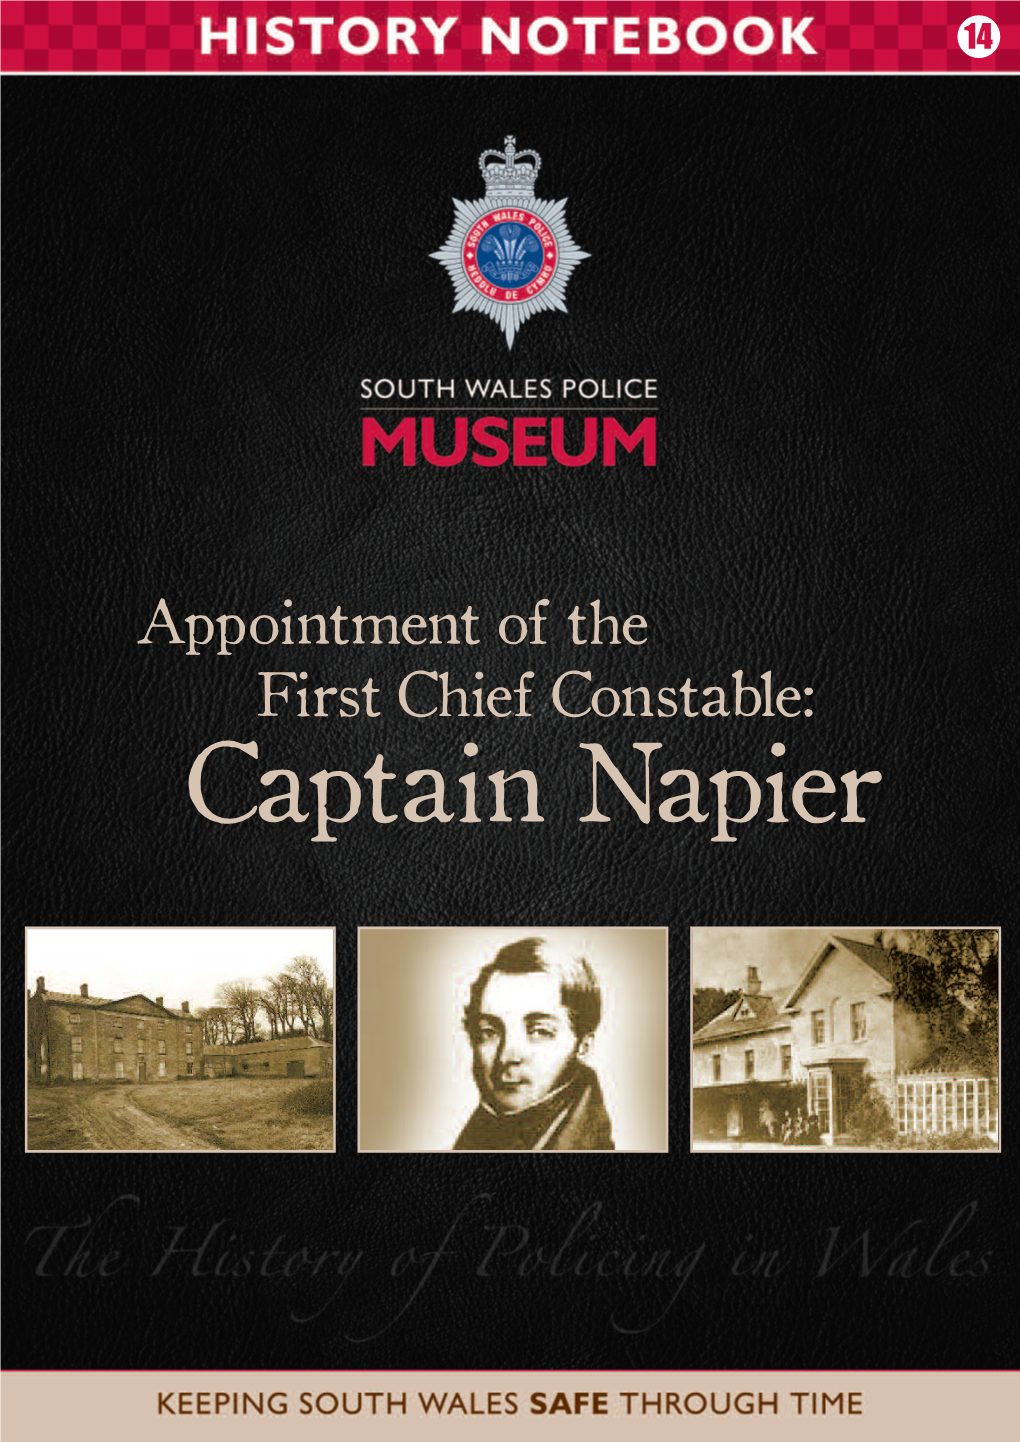 Captain Napier Appointment of the First Chief Constable: Captain Napier